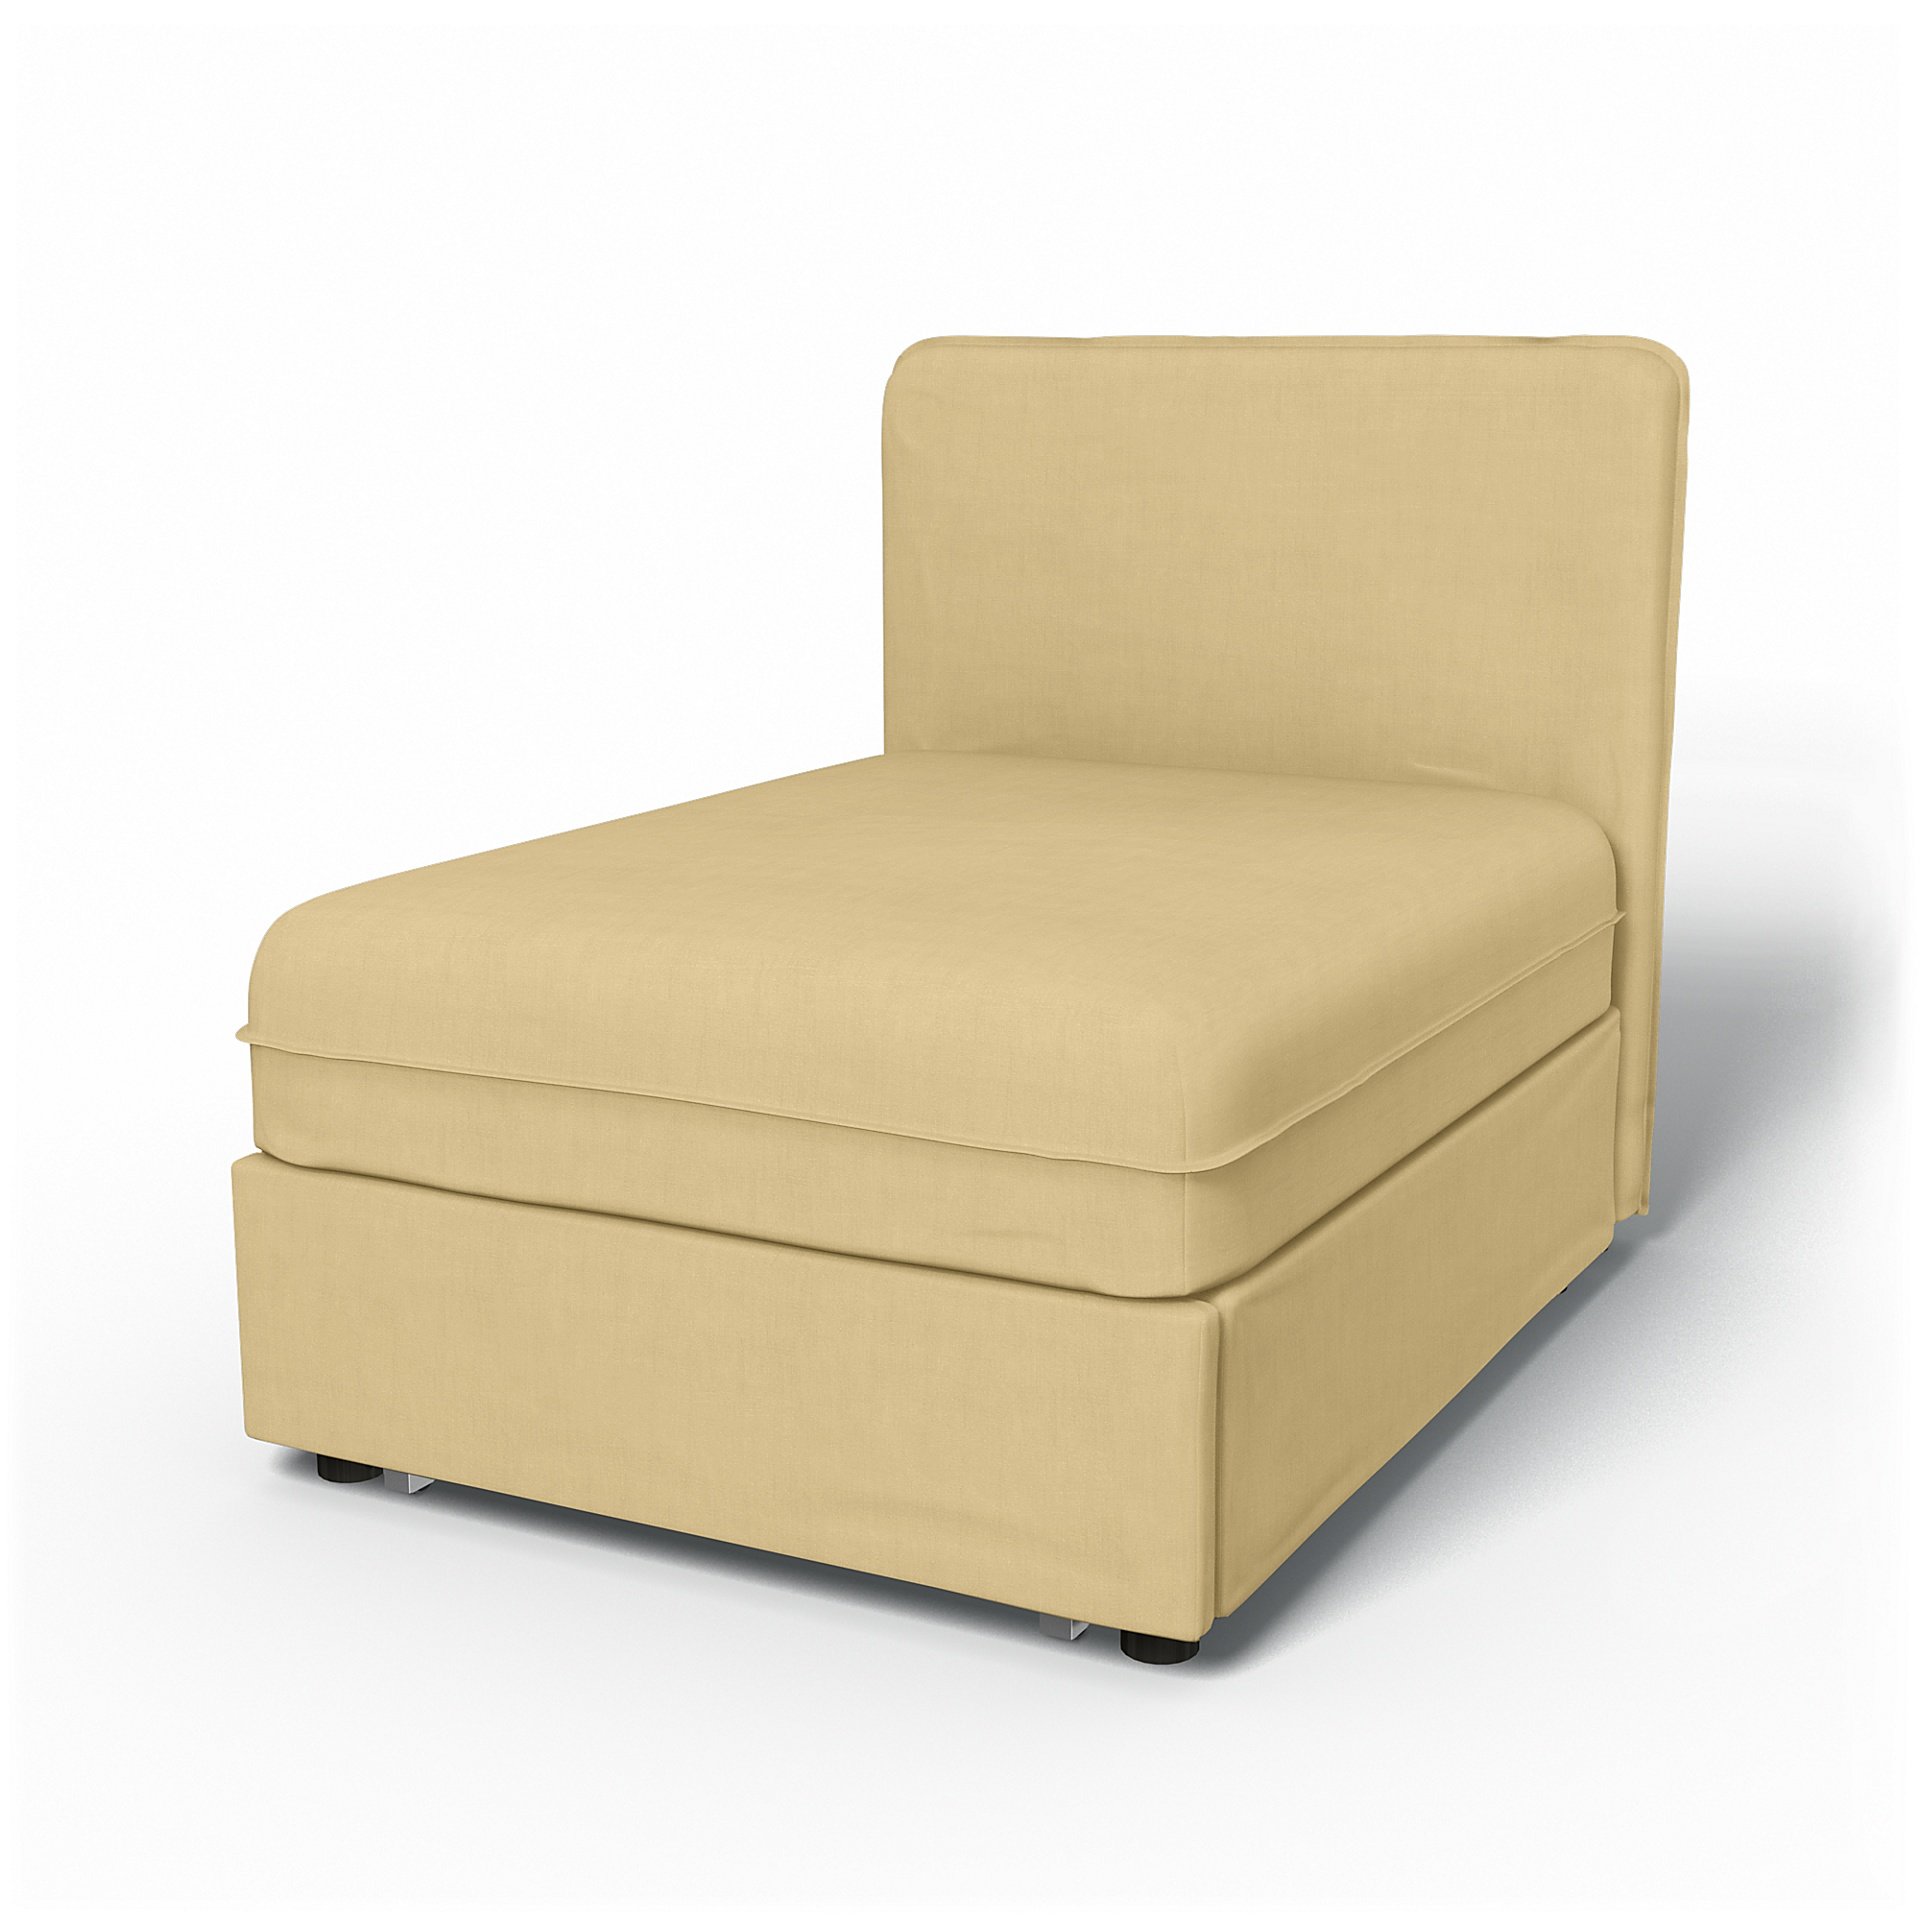 IKEA - Vallentuna Seat Module with Low Back Sofa Bed Cover 80x100 cm 32x39in, Straw Yellow, Linen - 